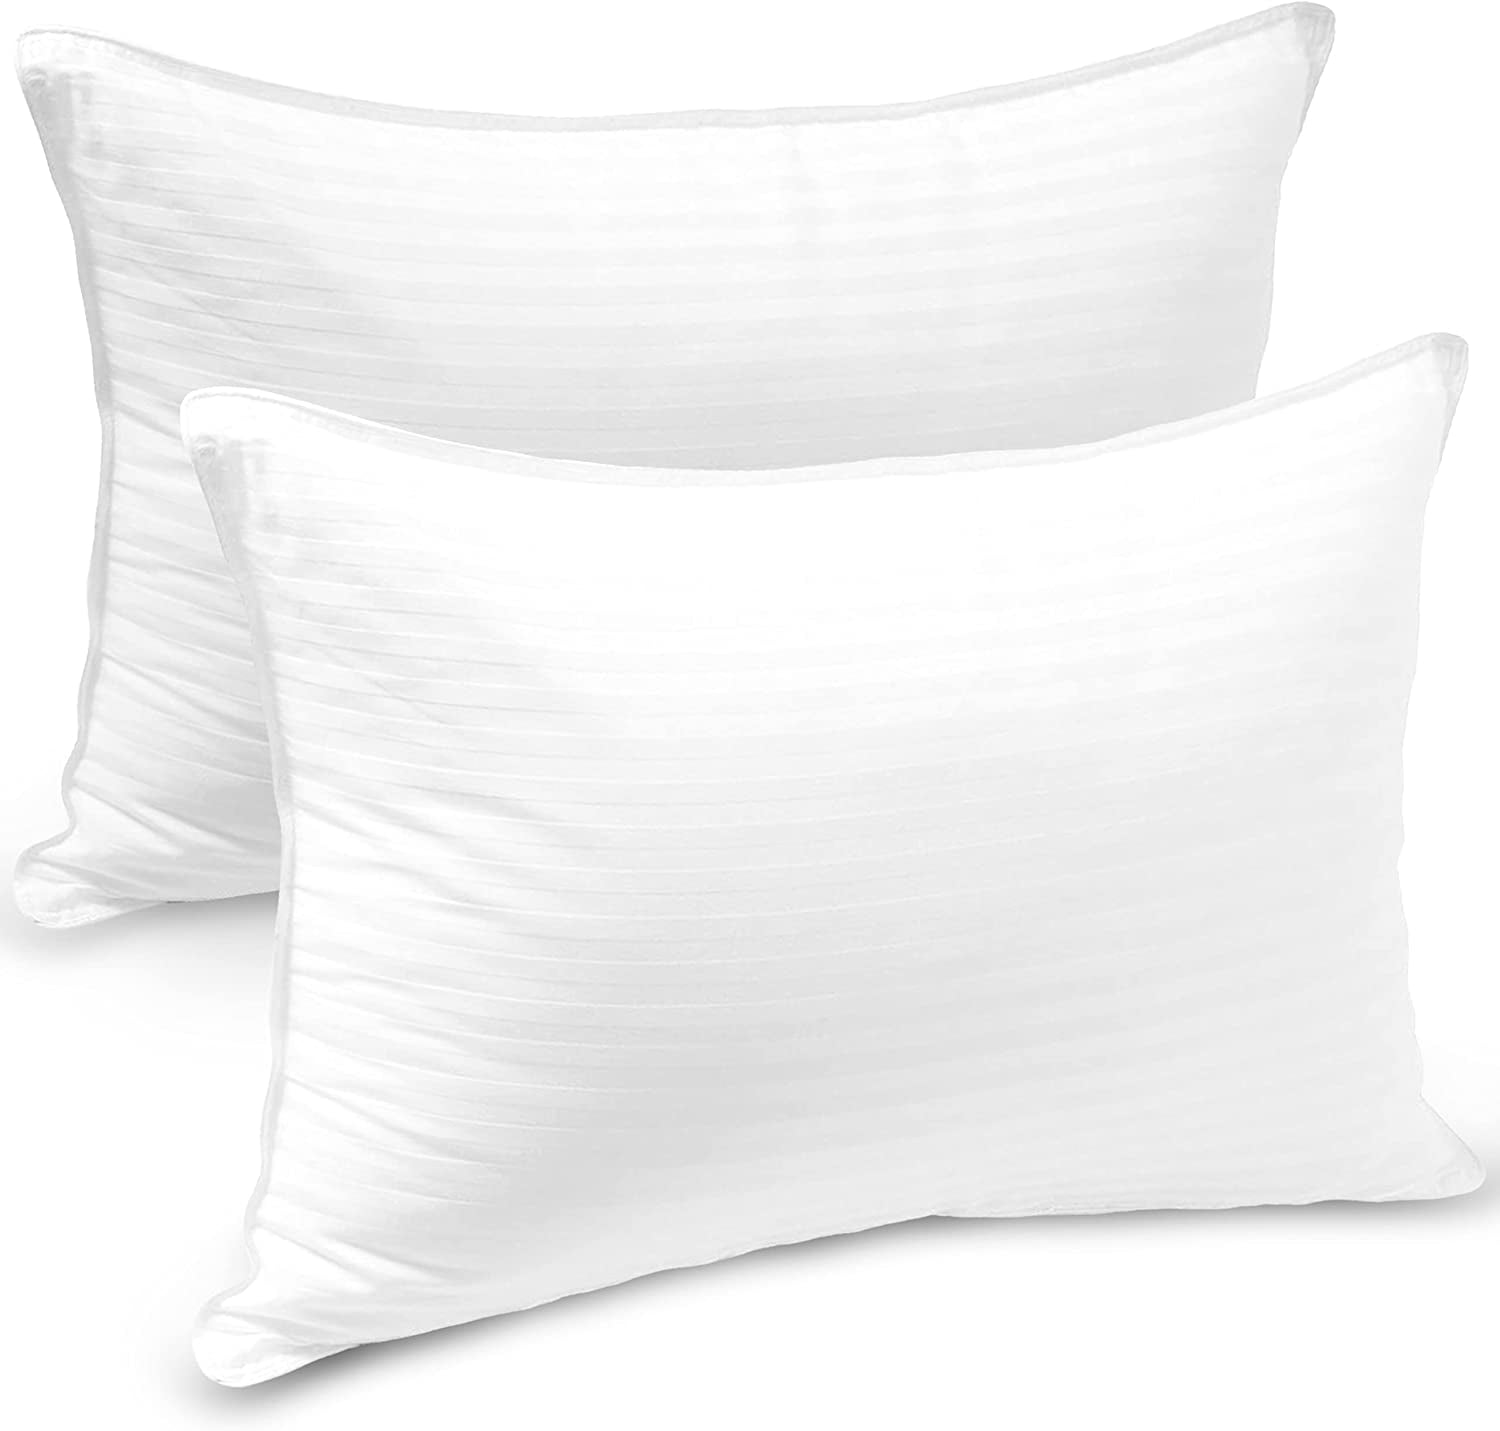 Basics Down-Alternative Gusseted Pillows with Cotton Shell 2-Pack GW2018031622-1 Queen